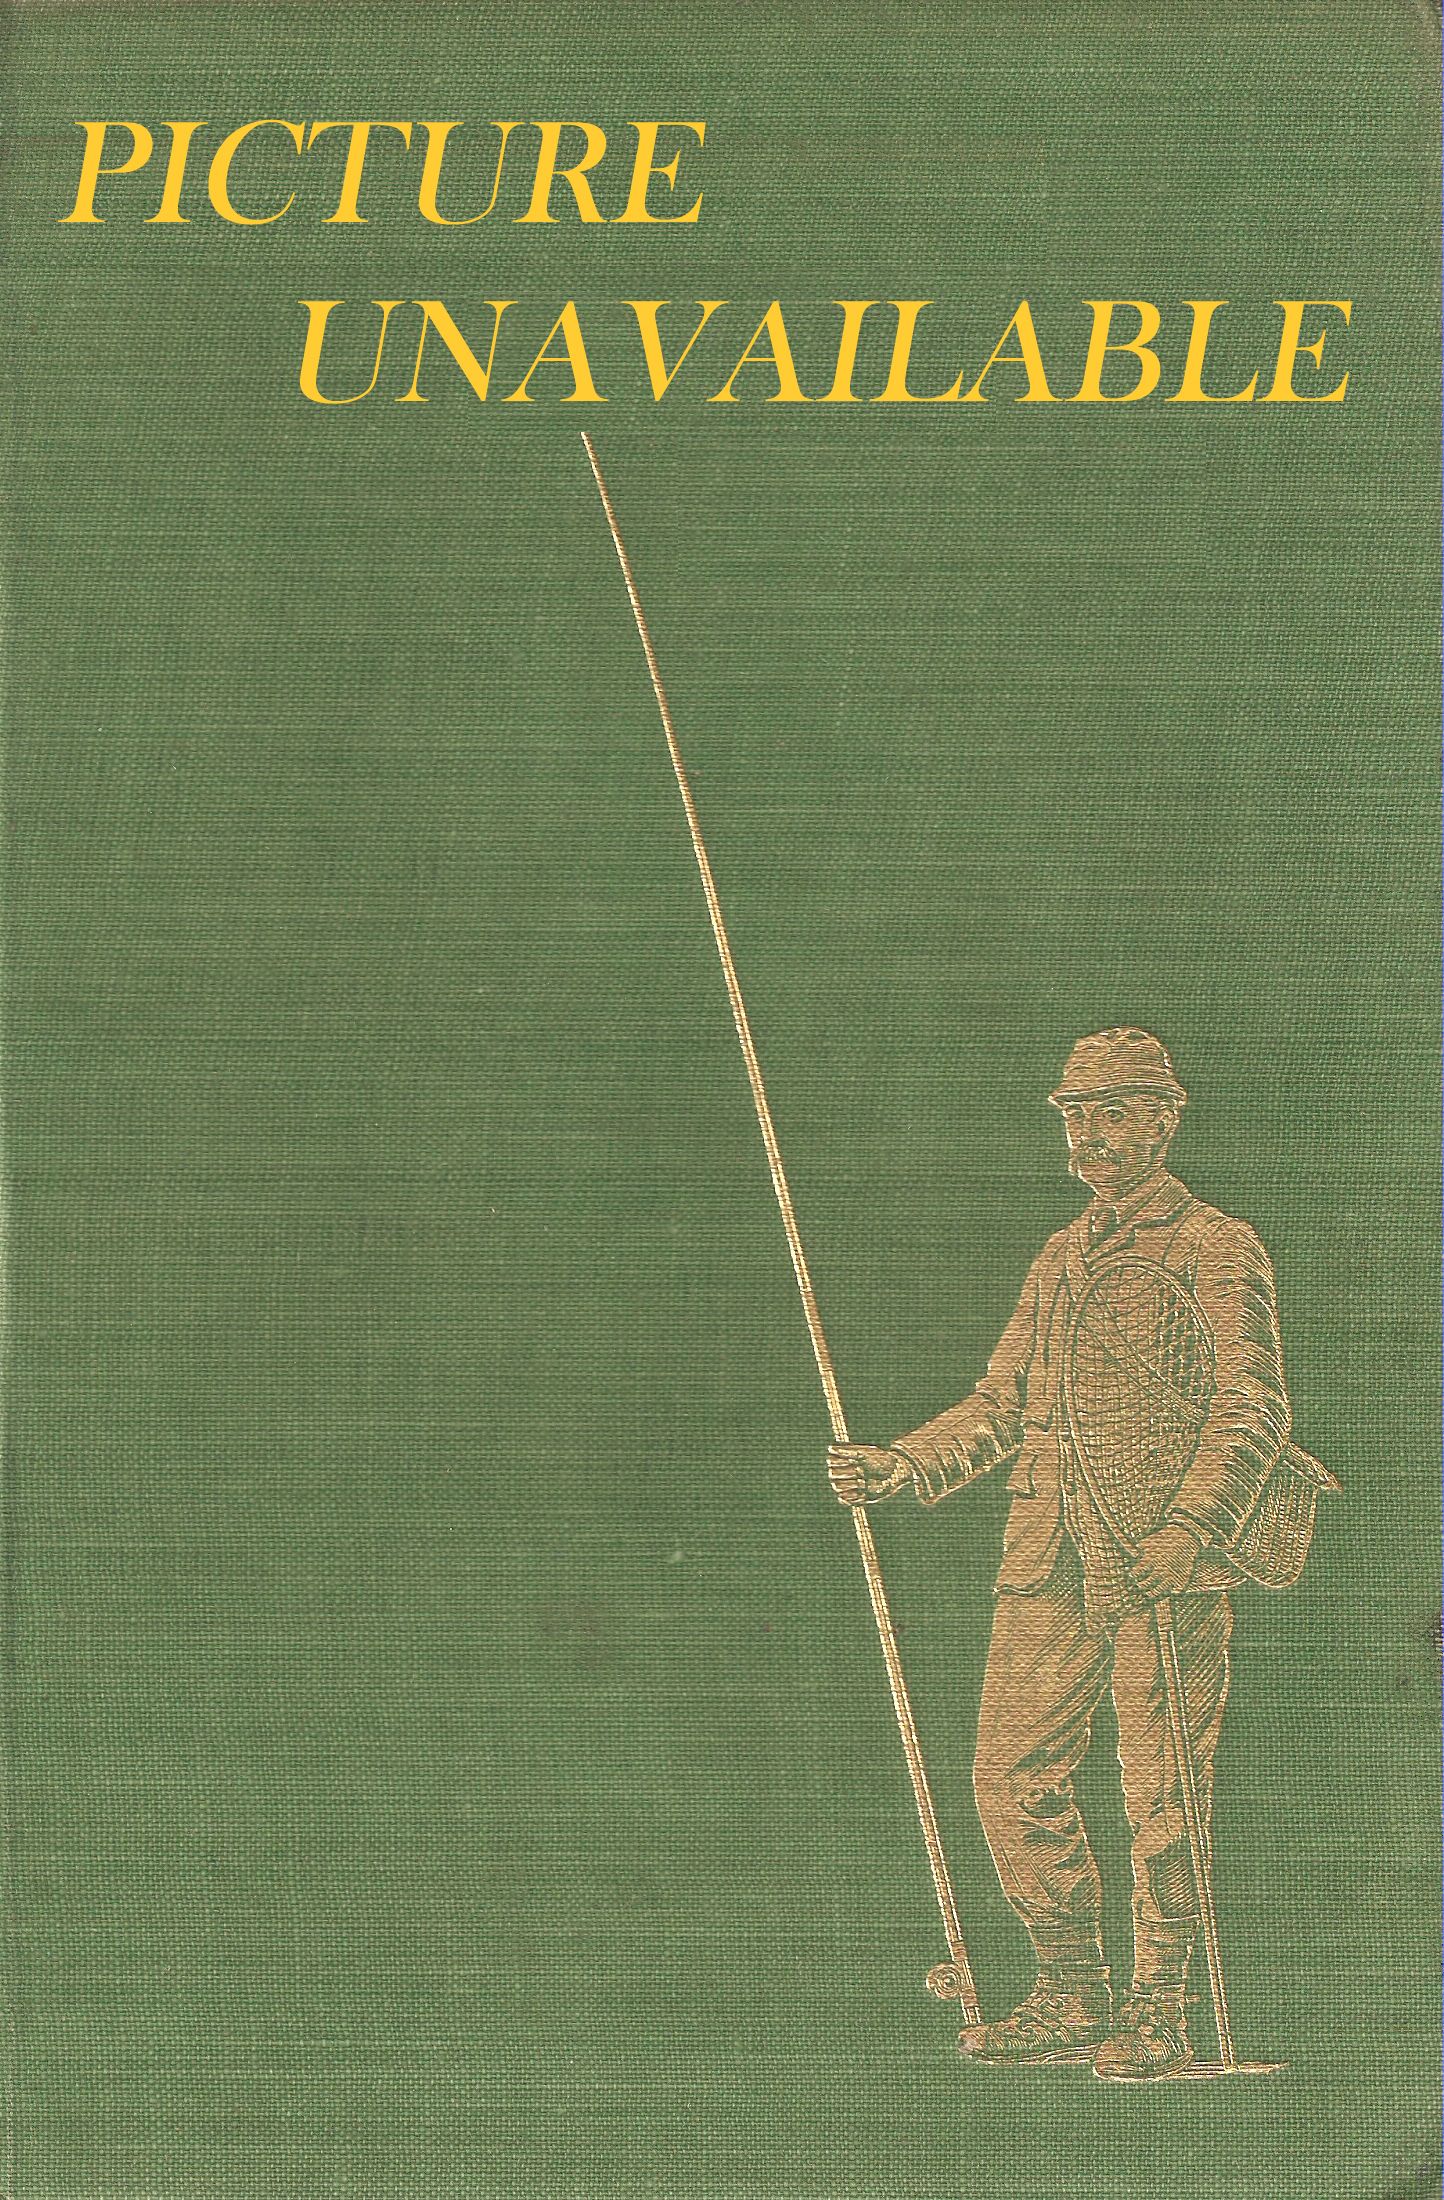 A MODERN TREATISE ON PRACTICAL COARSE FISH ANGLING: HOW TO CATCH FISH. By  Henry Coxon. Leather-bound edition.